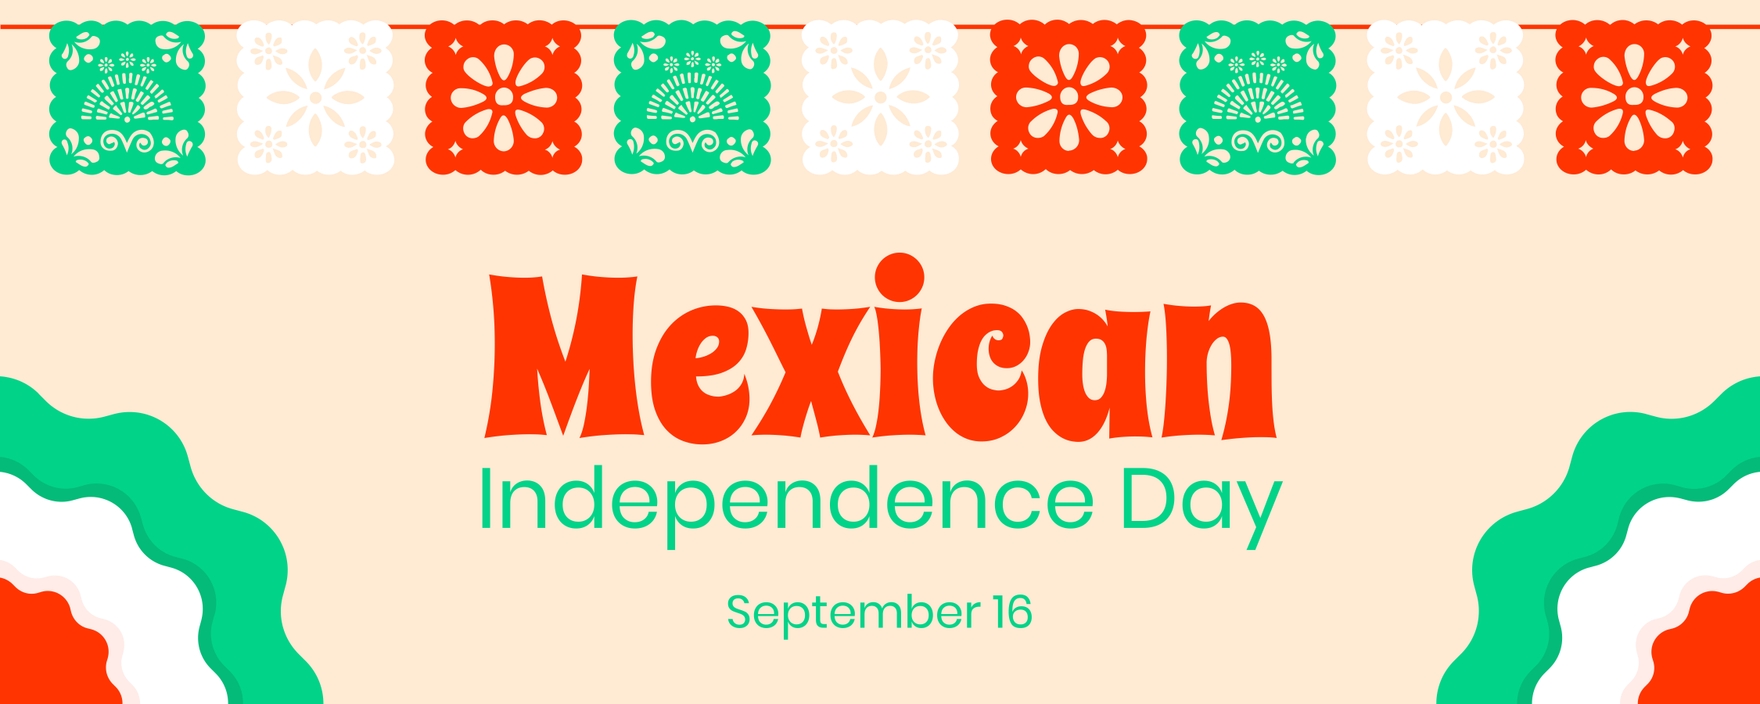 Mexican Independence Day Flex Banner in Illustrator, PSD, EPS, SVG, JPG, PNG